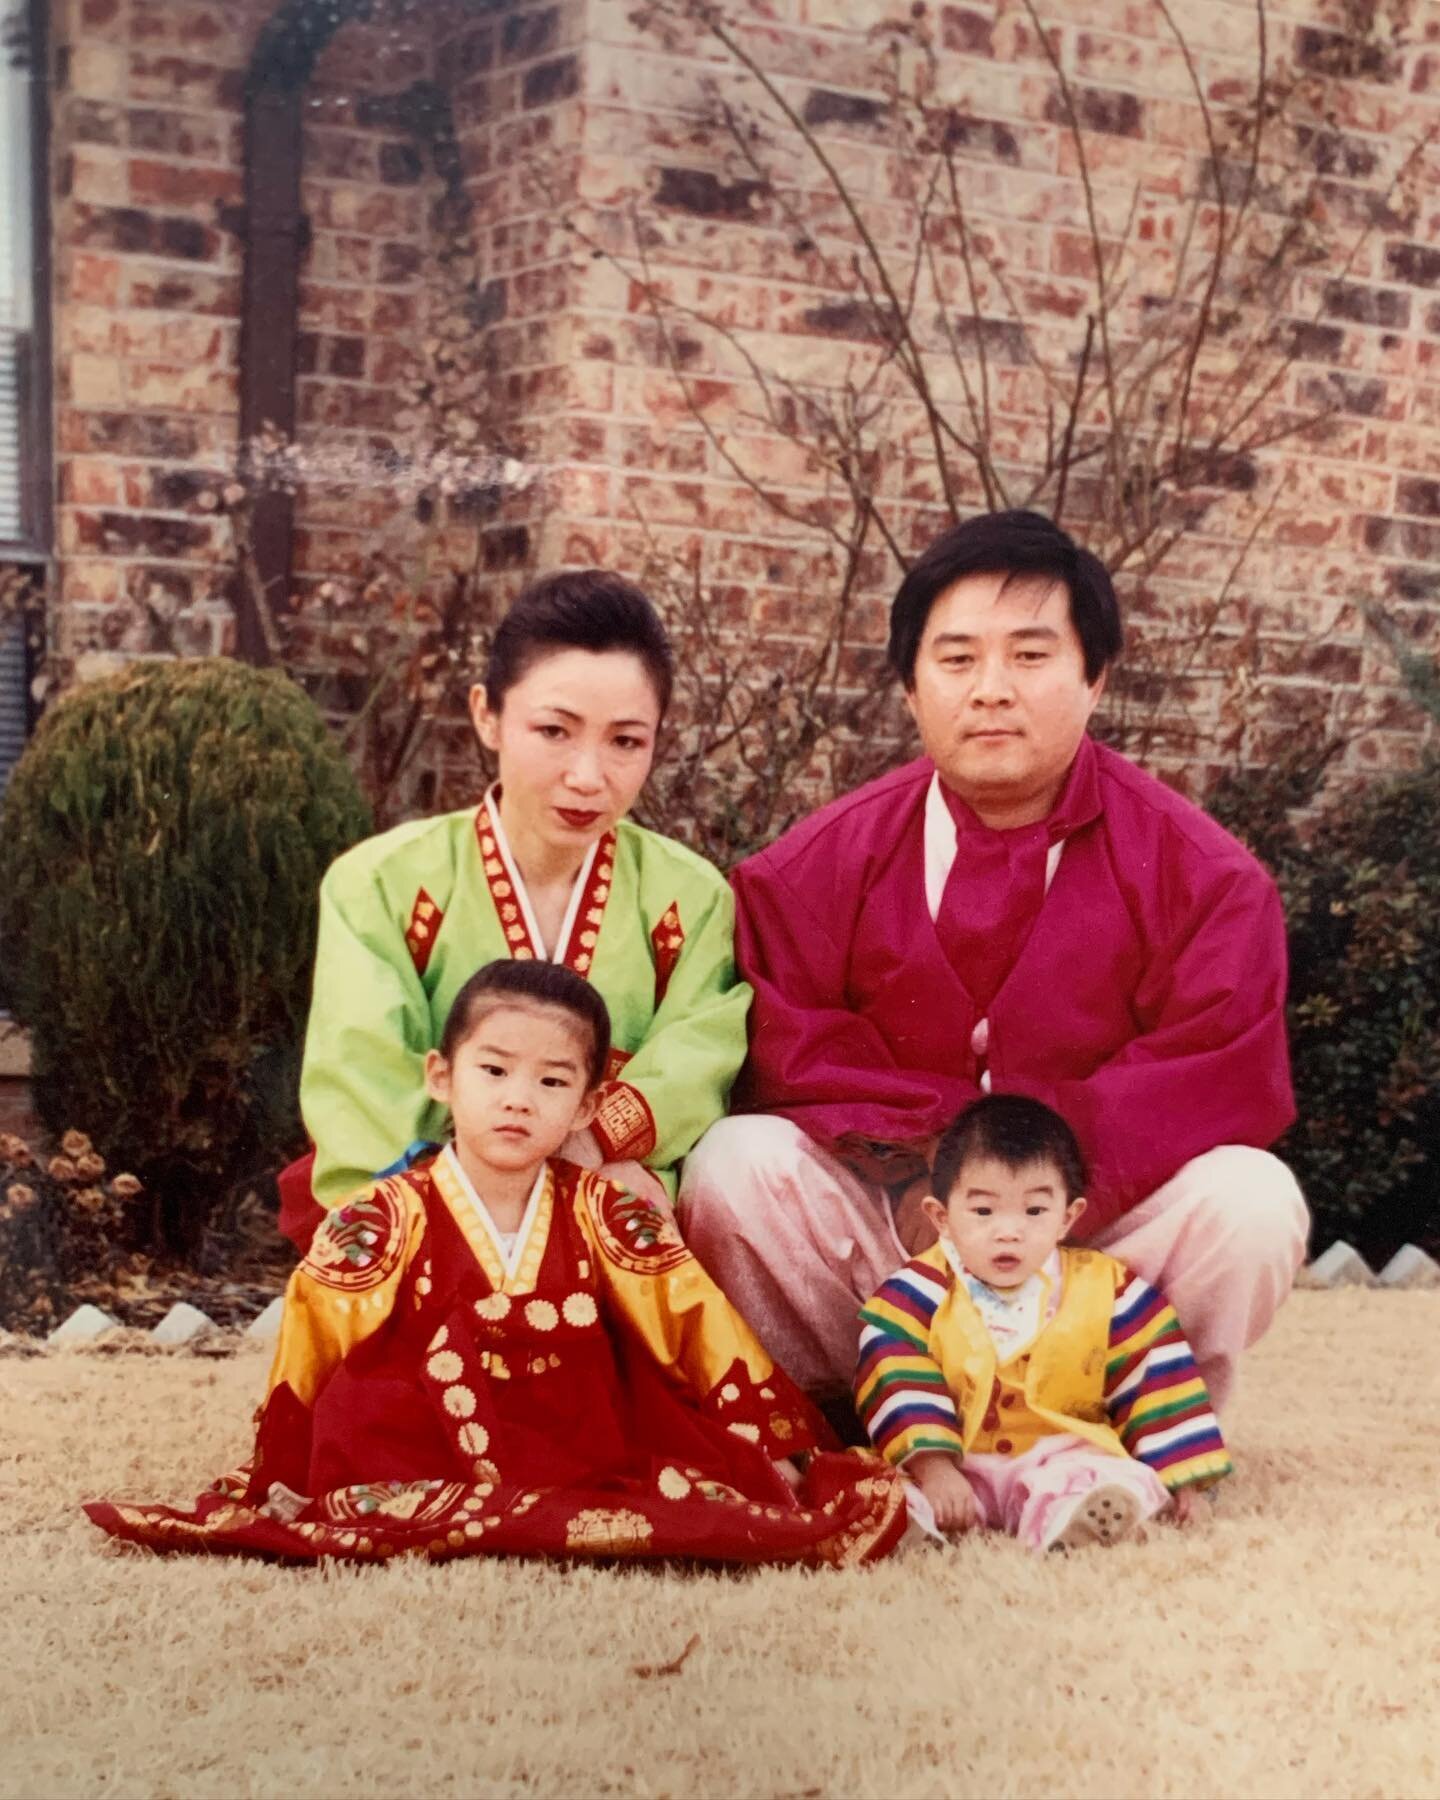 Happy Lunar New Year 🧧 ⁣
⁣
My family in 1990, in our traditional Korean Hanboks. At this age I was already bullied at school by teachers &amp; other kids for being Asian. I was embarrassed of our culture &amp; food. Grew up hating it all because I t